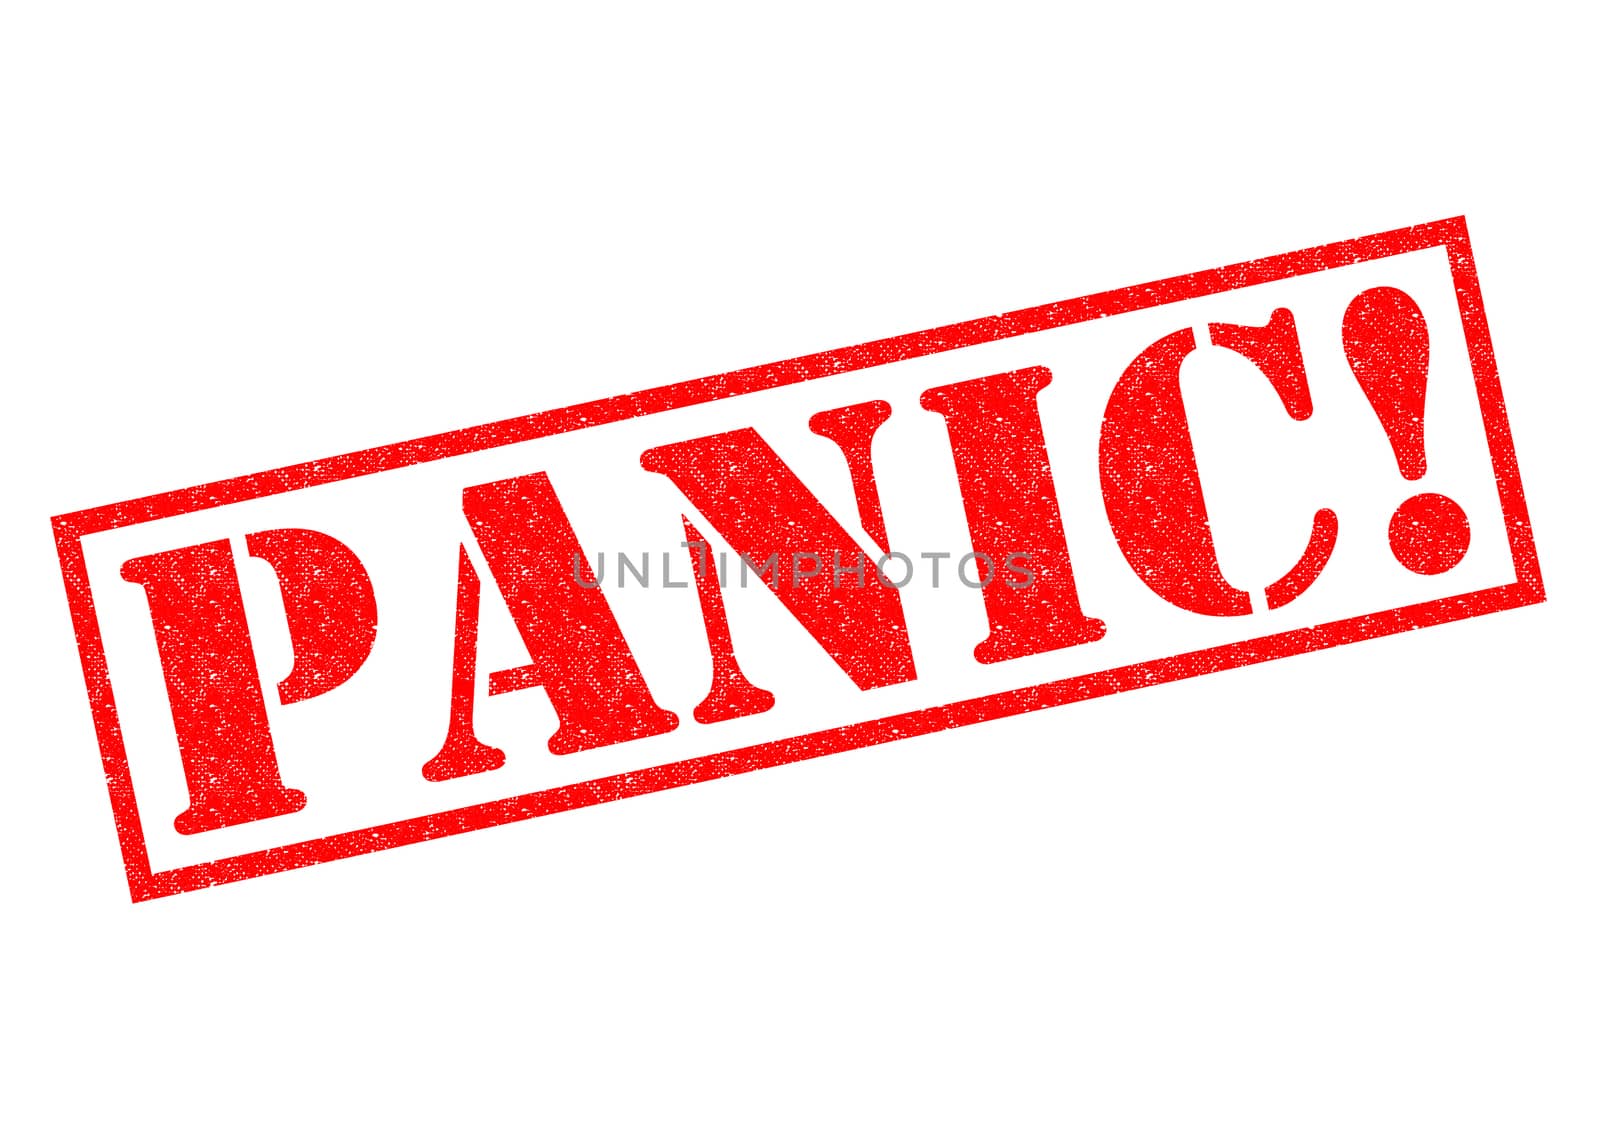 PANIC! red Rubber Stamp over a white background.